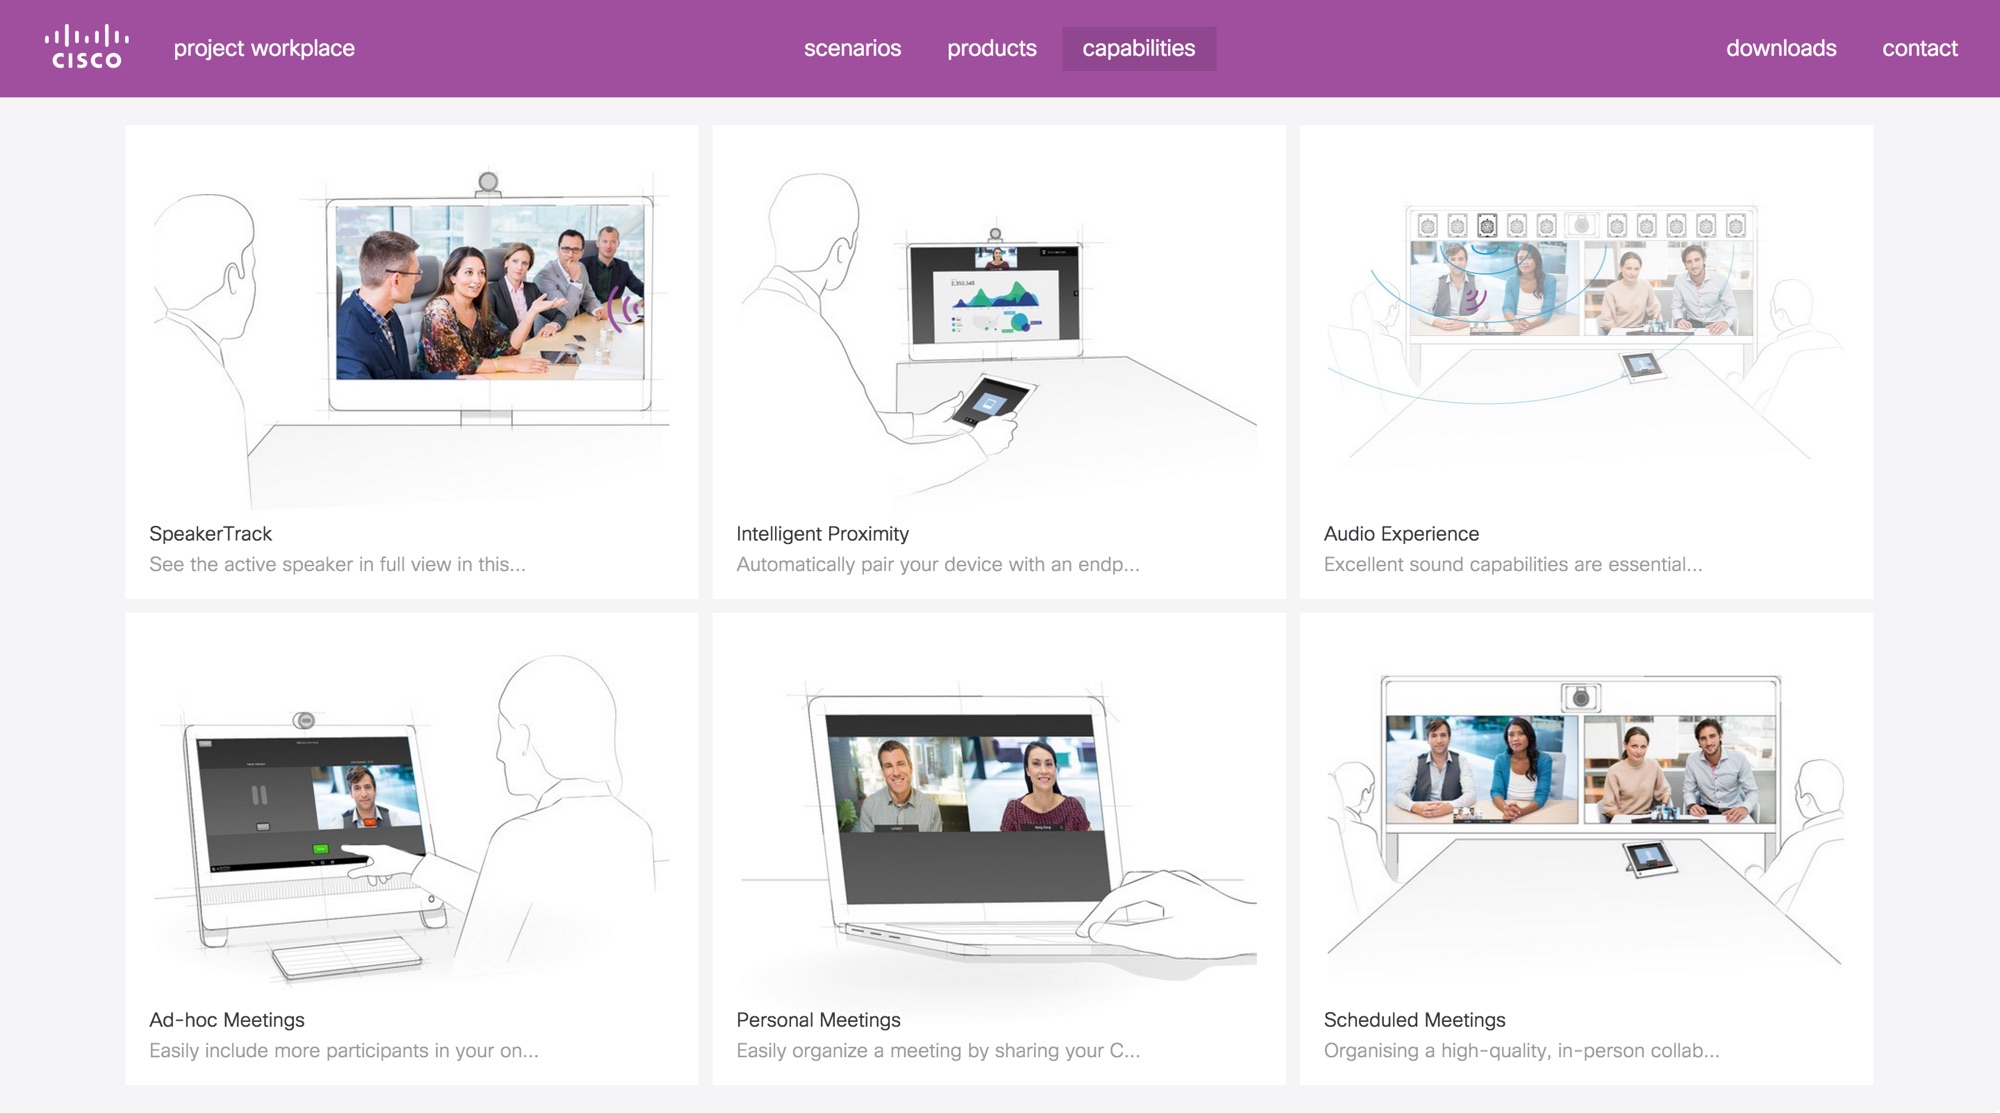 Capabilities page showing illustrations of product features